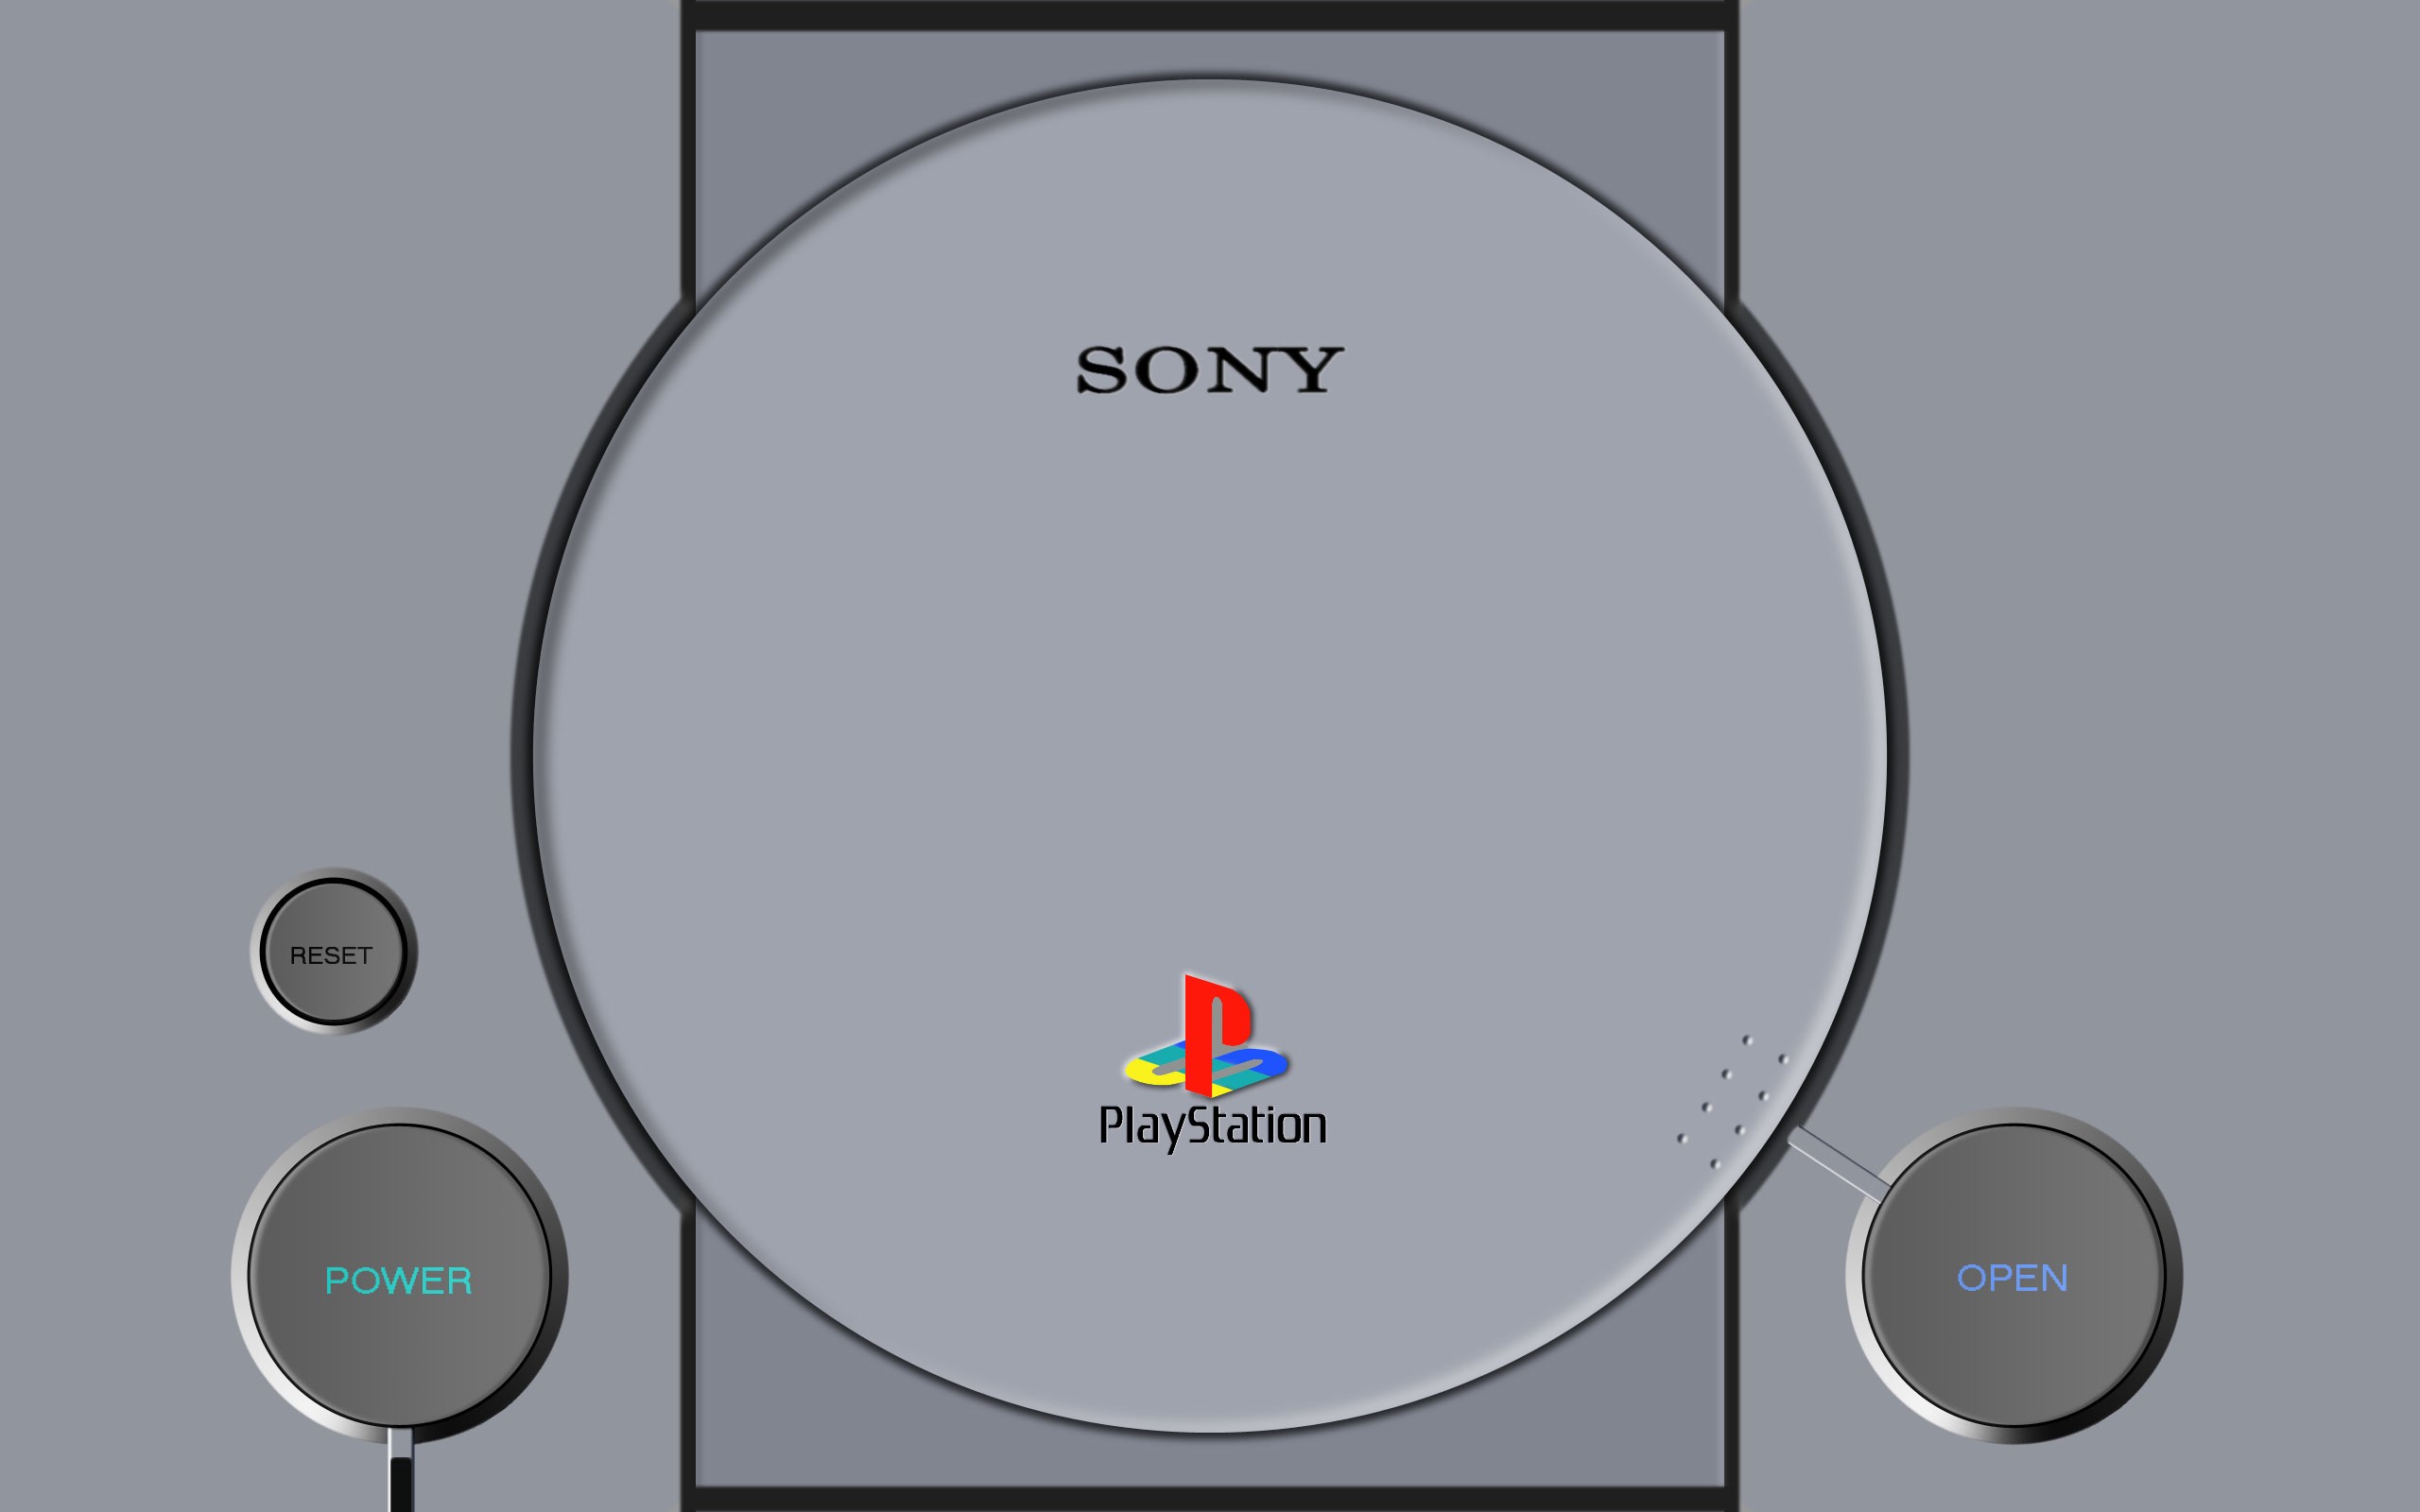 PlayStation Sony Video Games Console 2560x1600